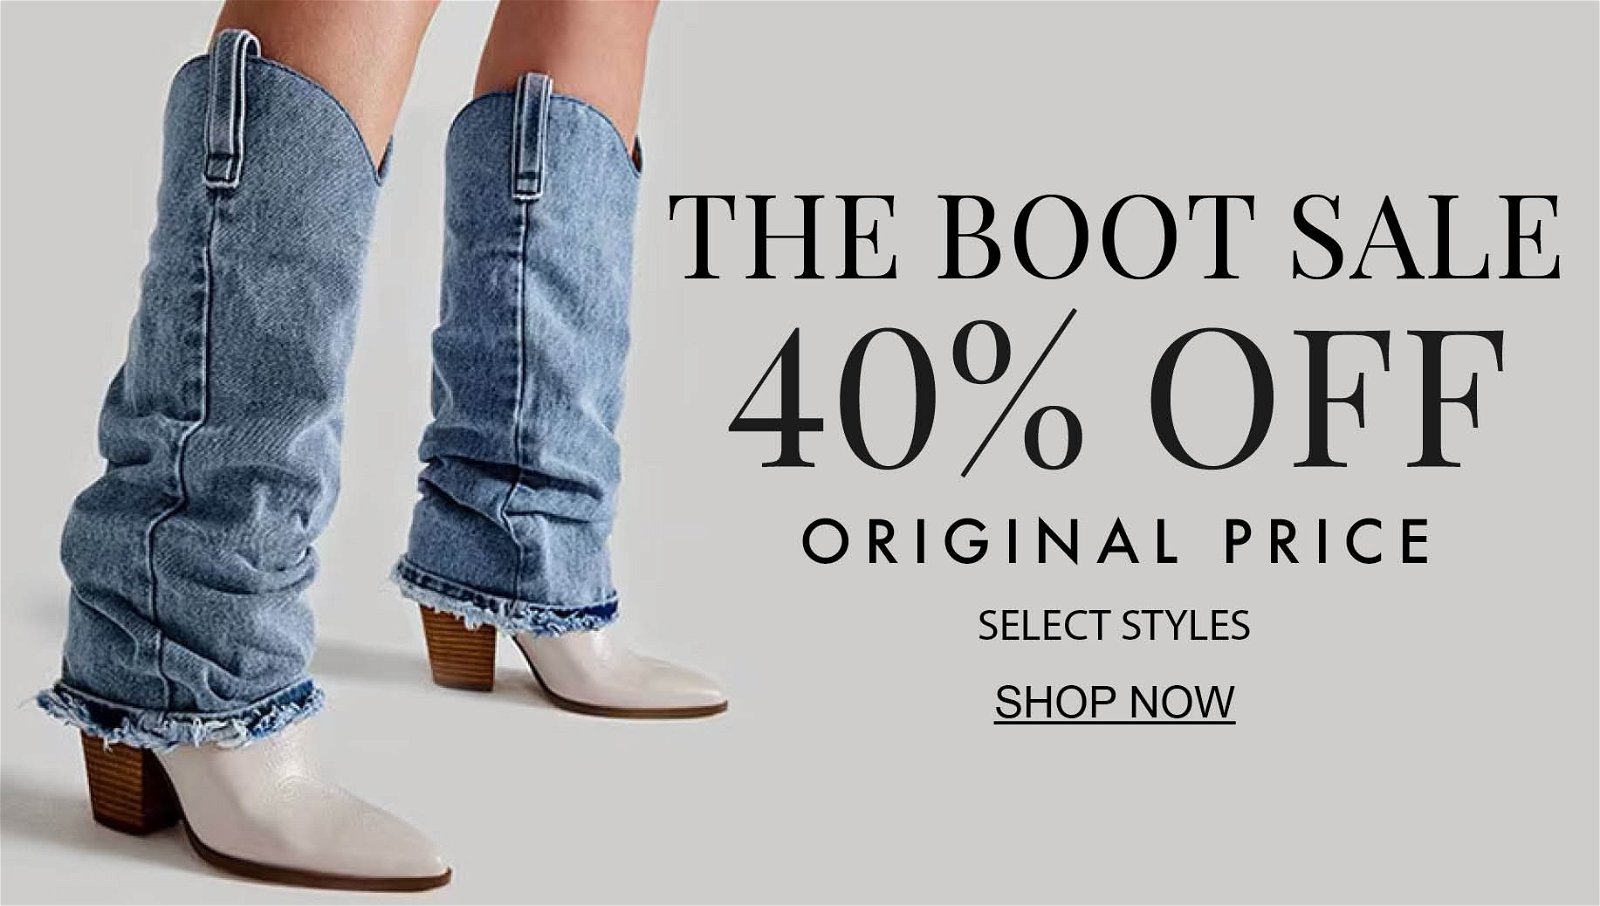 The Boot Sale, 40% OFF Original Price, Select Styles, Shop Now